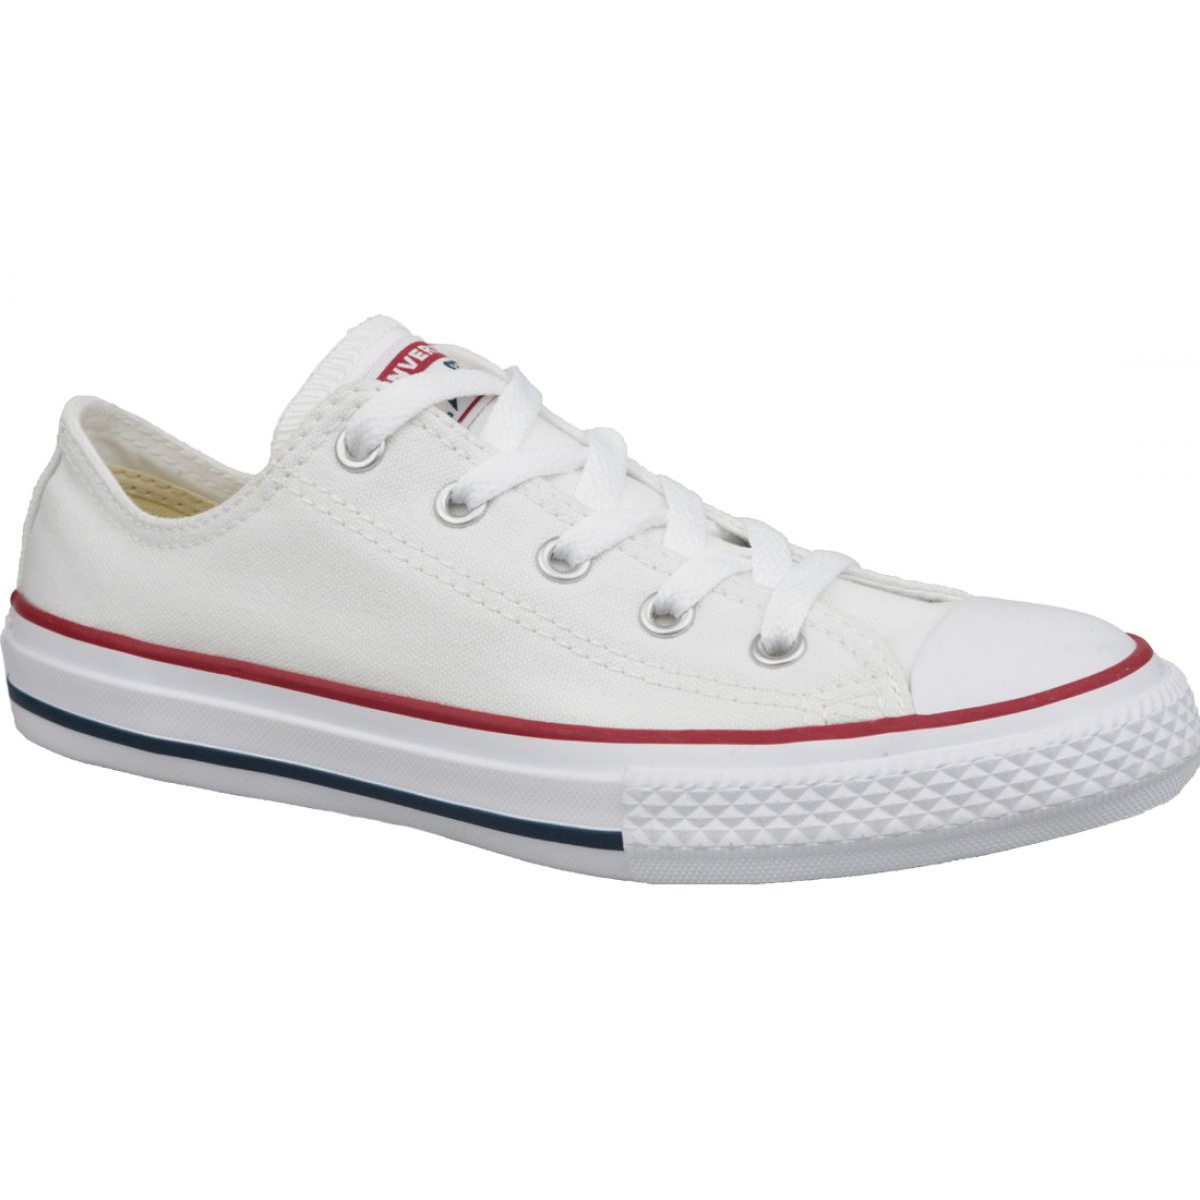 Converse Chuck Taylor Star Core Ox white shoes - KeeShoes